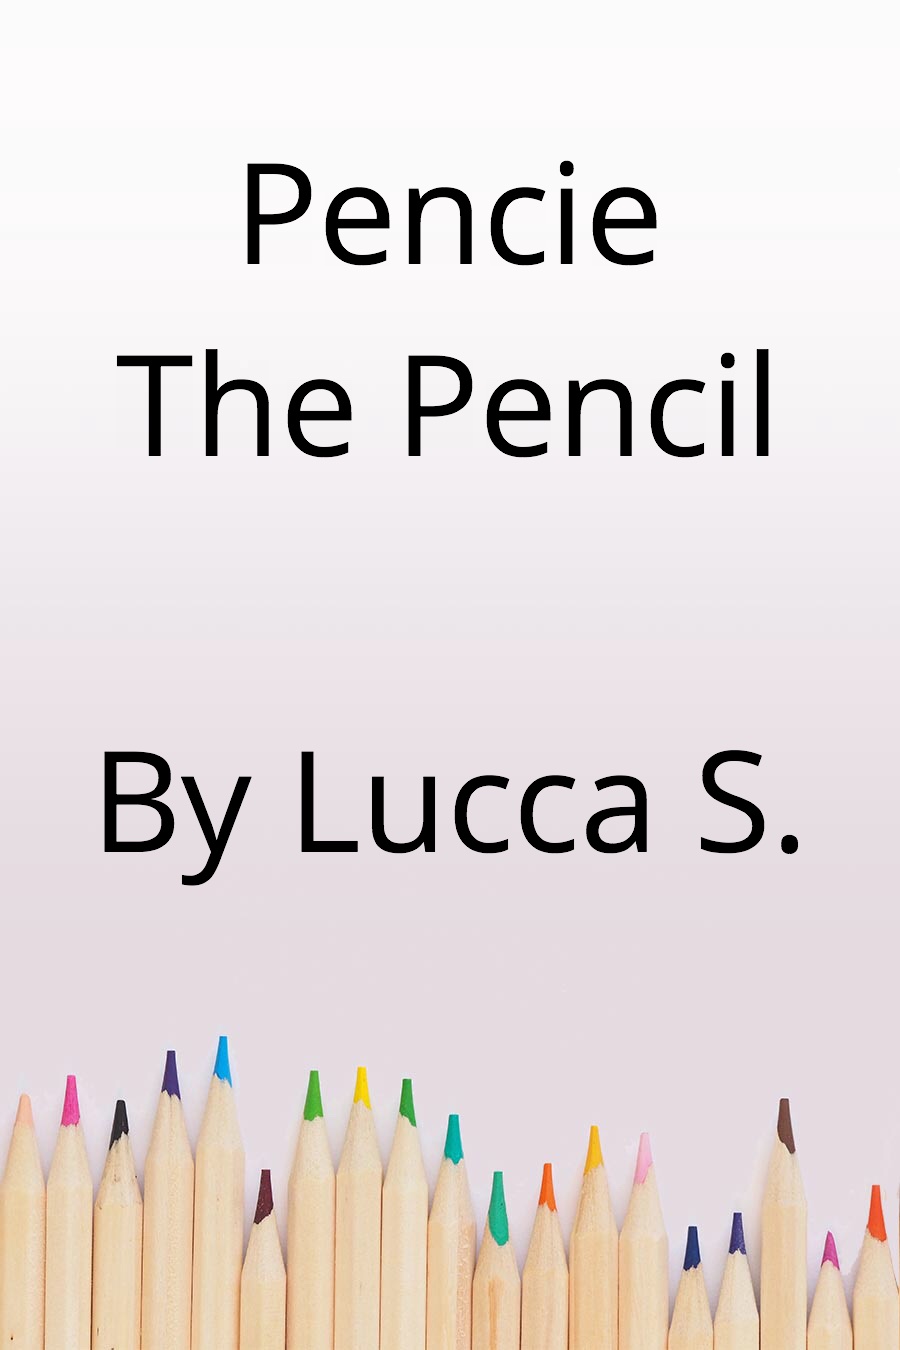 Pencie the Pencil by Lucca S